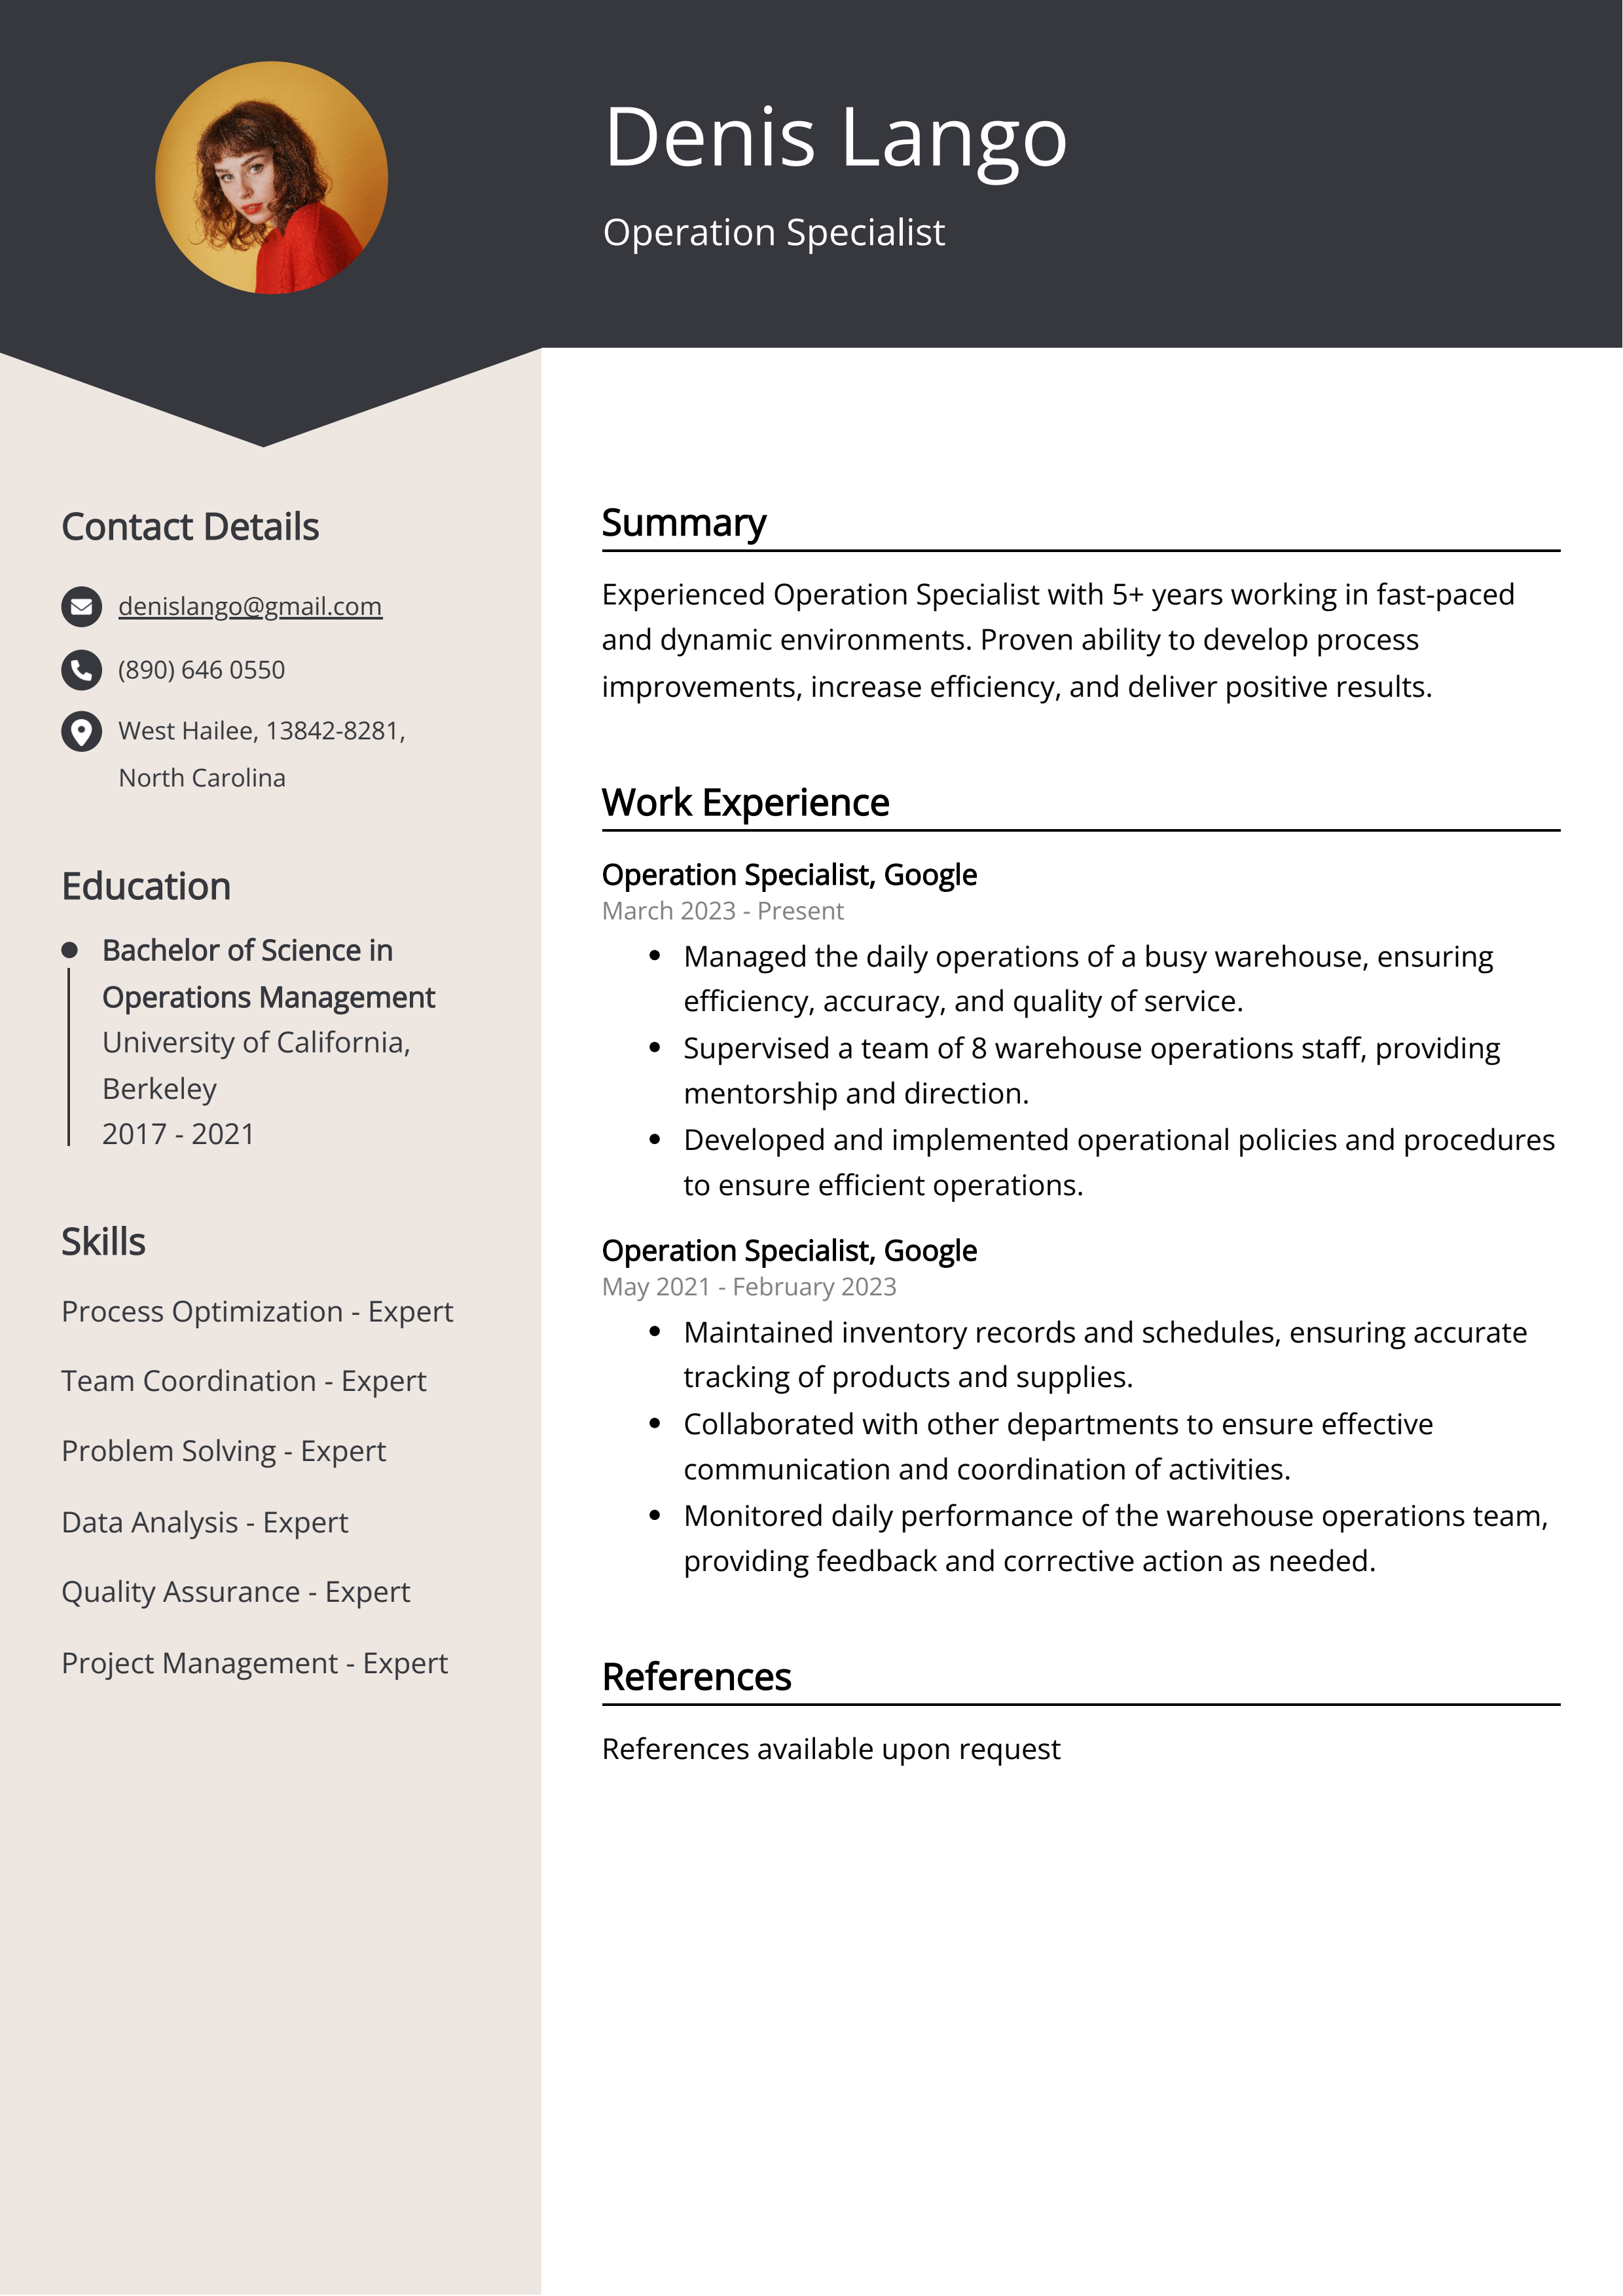 Operation Specialist Resume Example